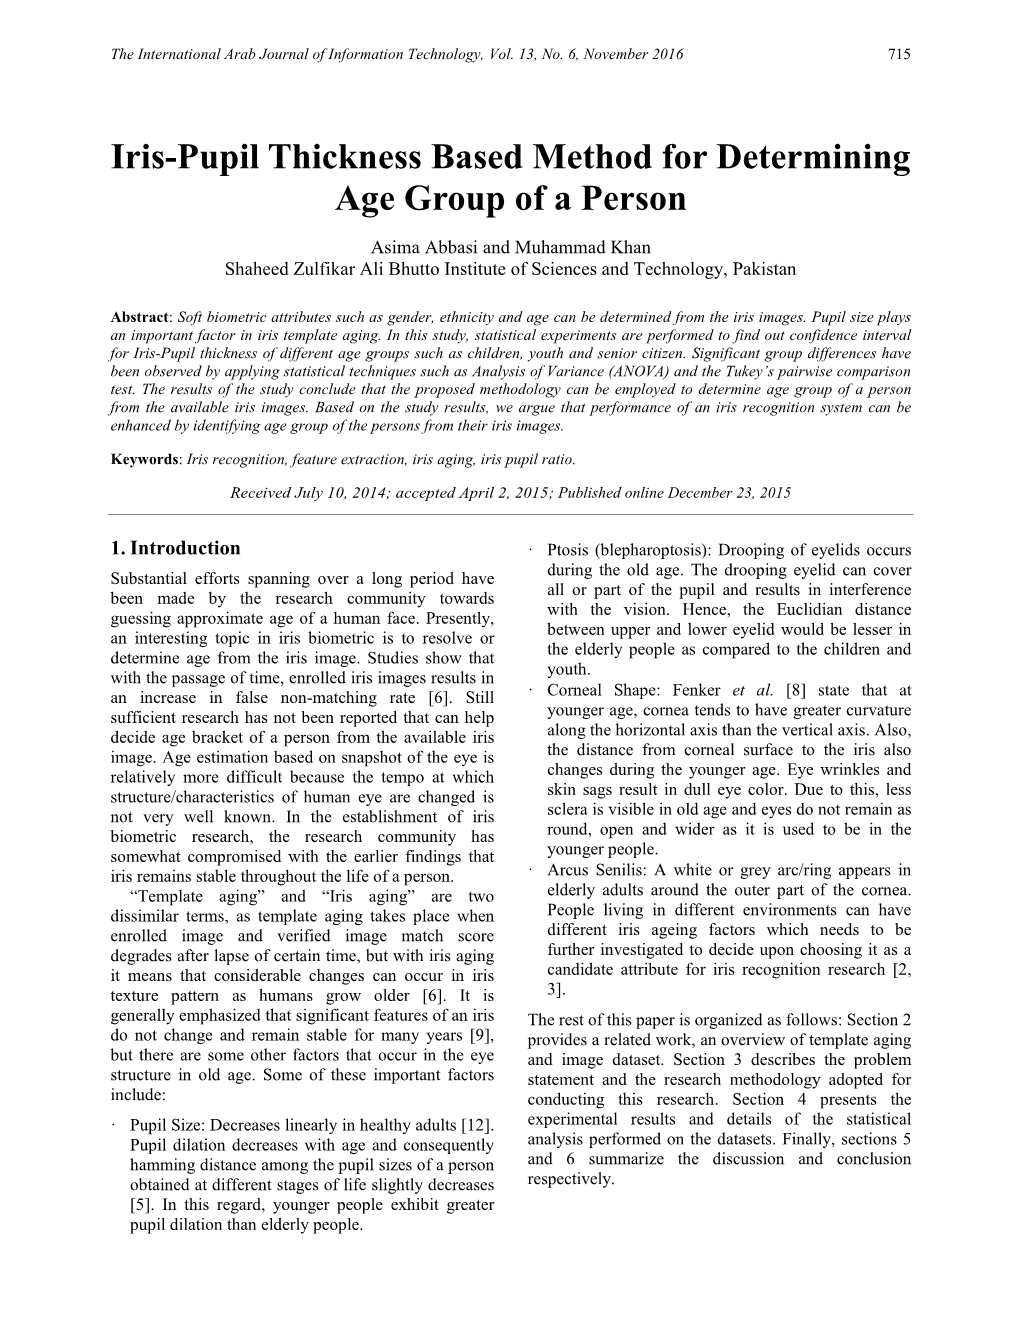 Iris-Pupil Thickness Based Method for Determining Age Group of a Person